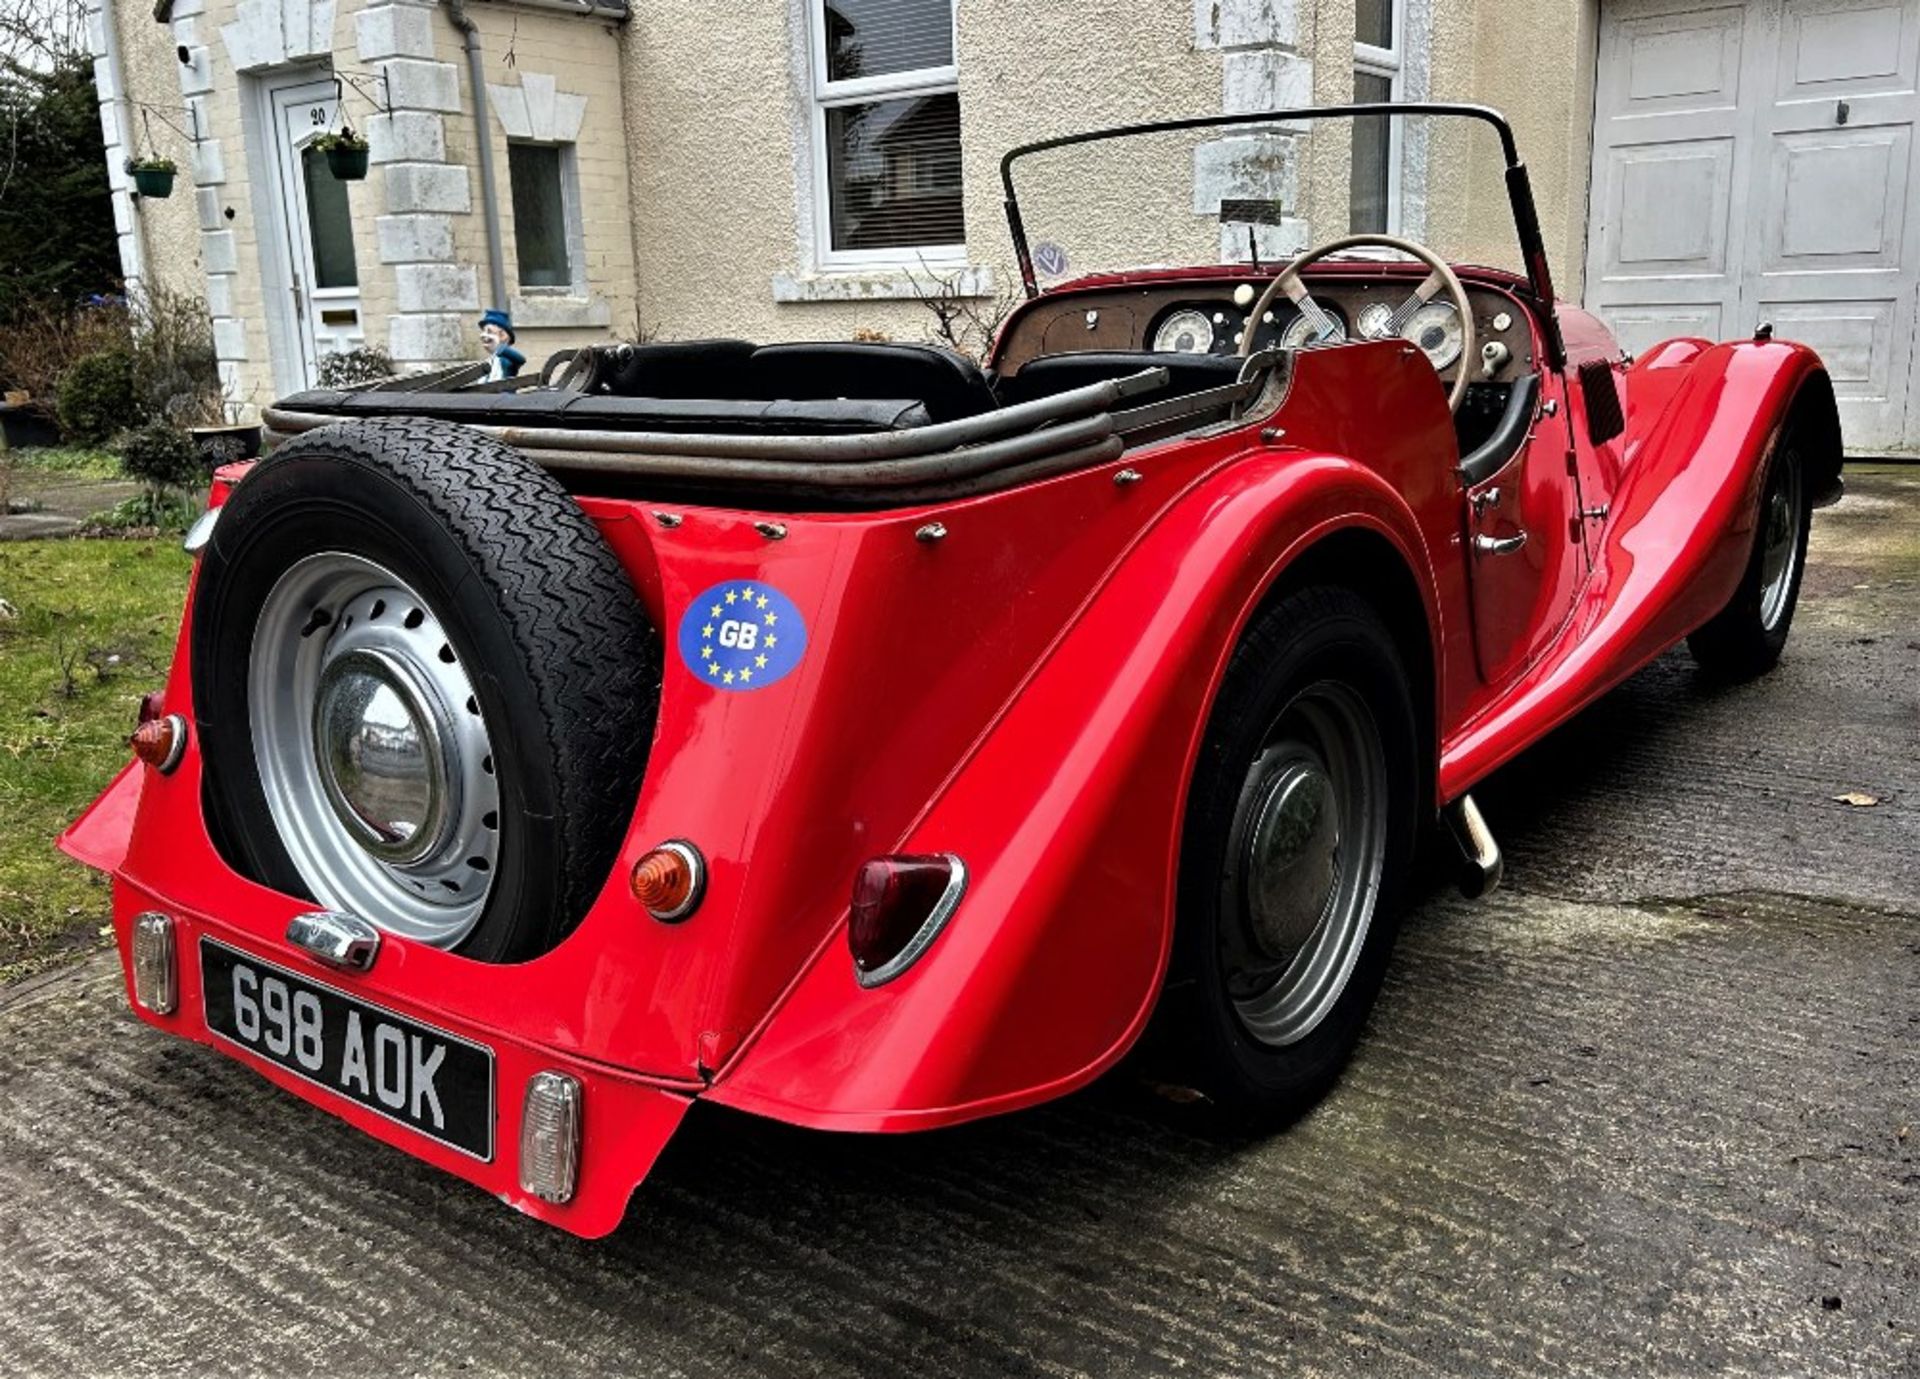 1959 MORGAN PLUS FOUR Registration Number: 698 AOK Chassis Number: 4398 Recorded Mileage: TBA - - Image 5 of 15